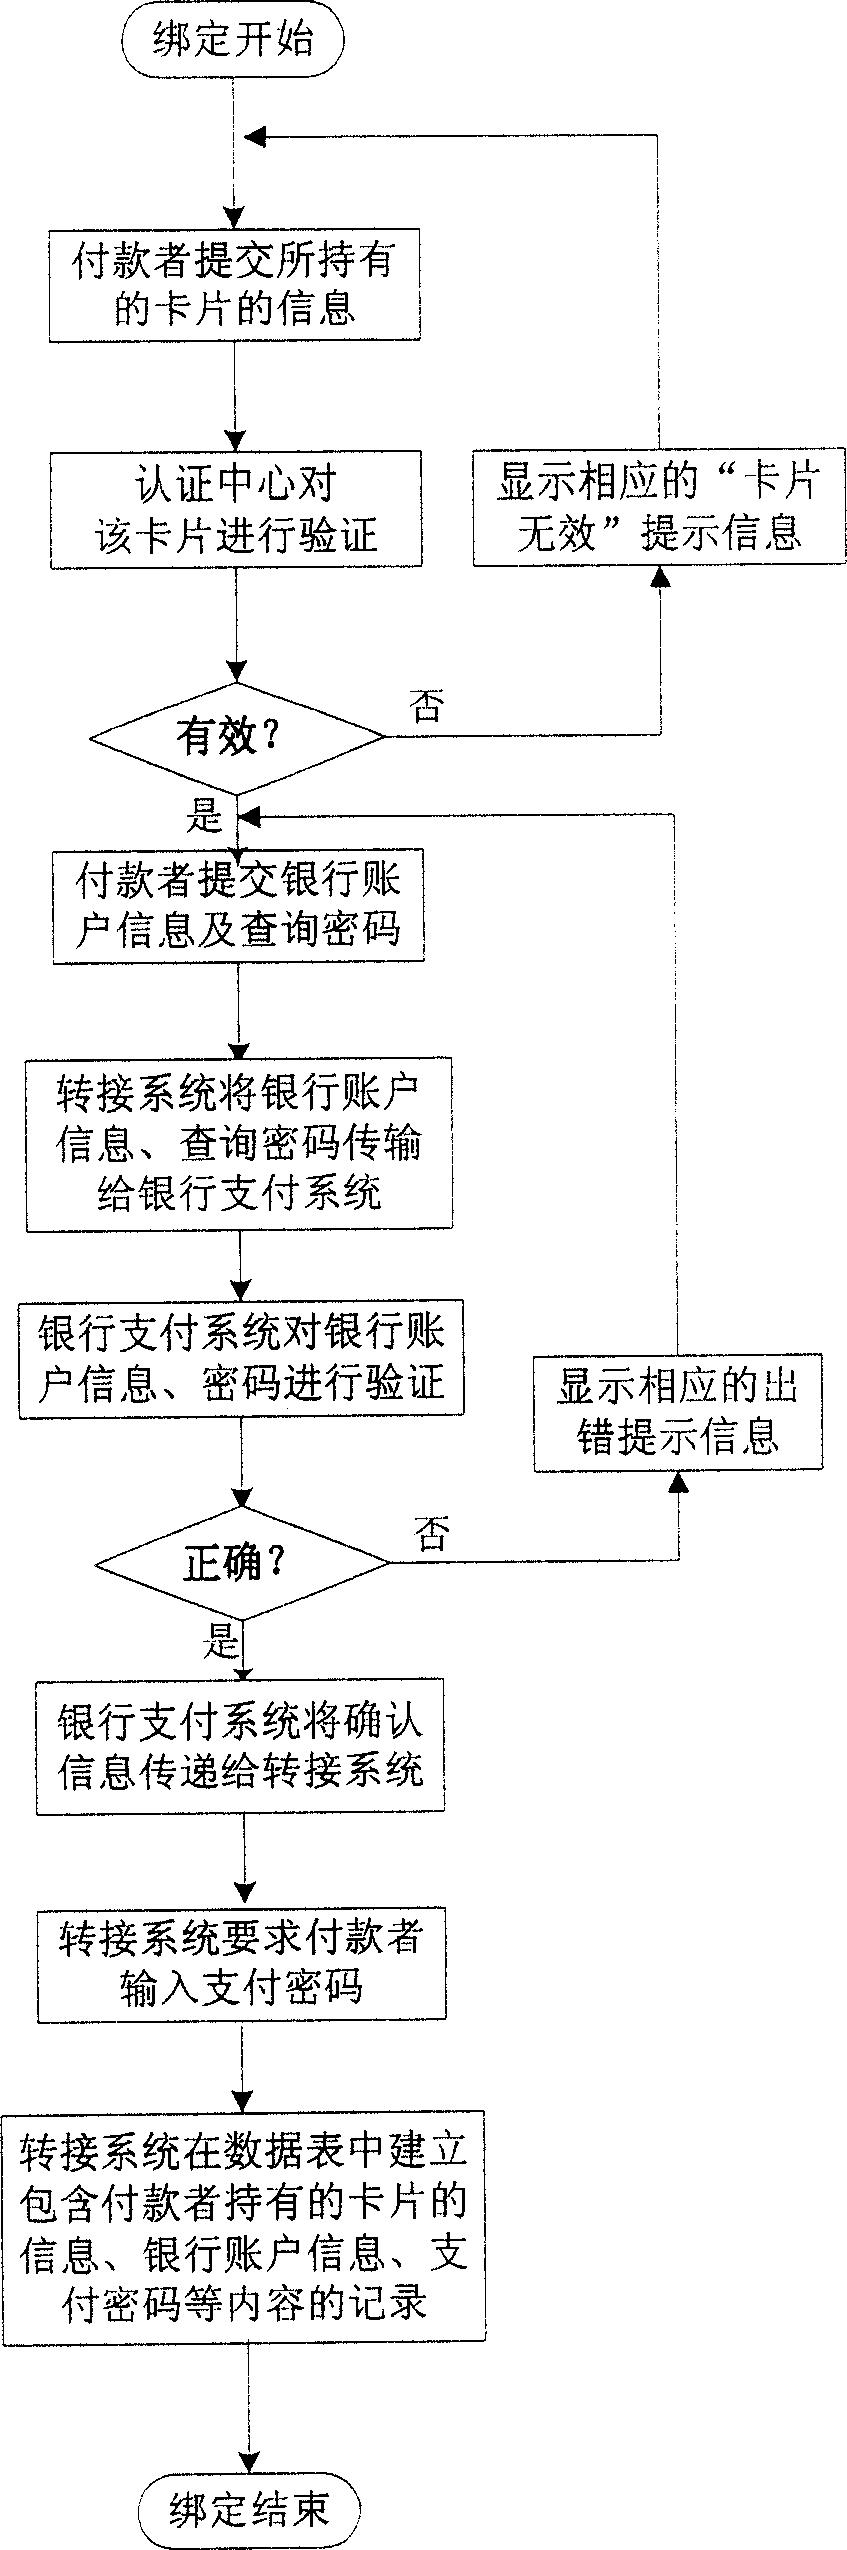 Charging system and settlement payment method